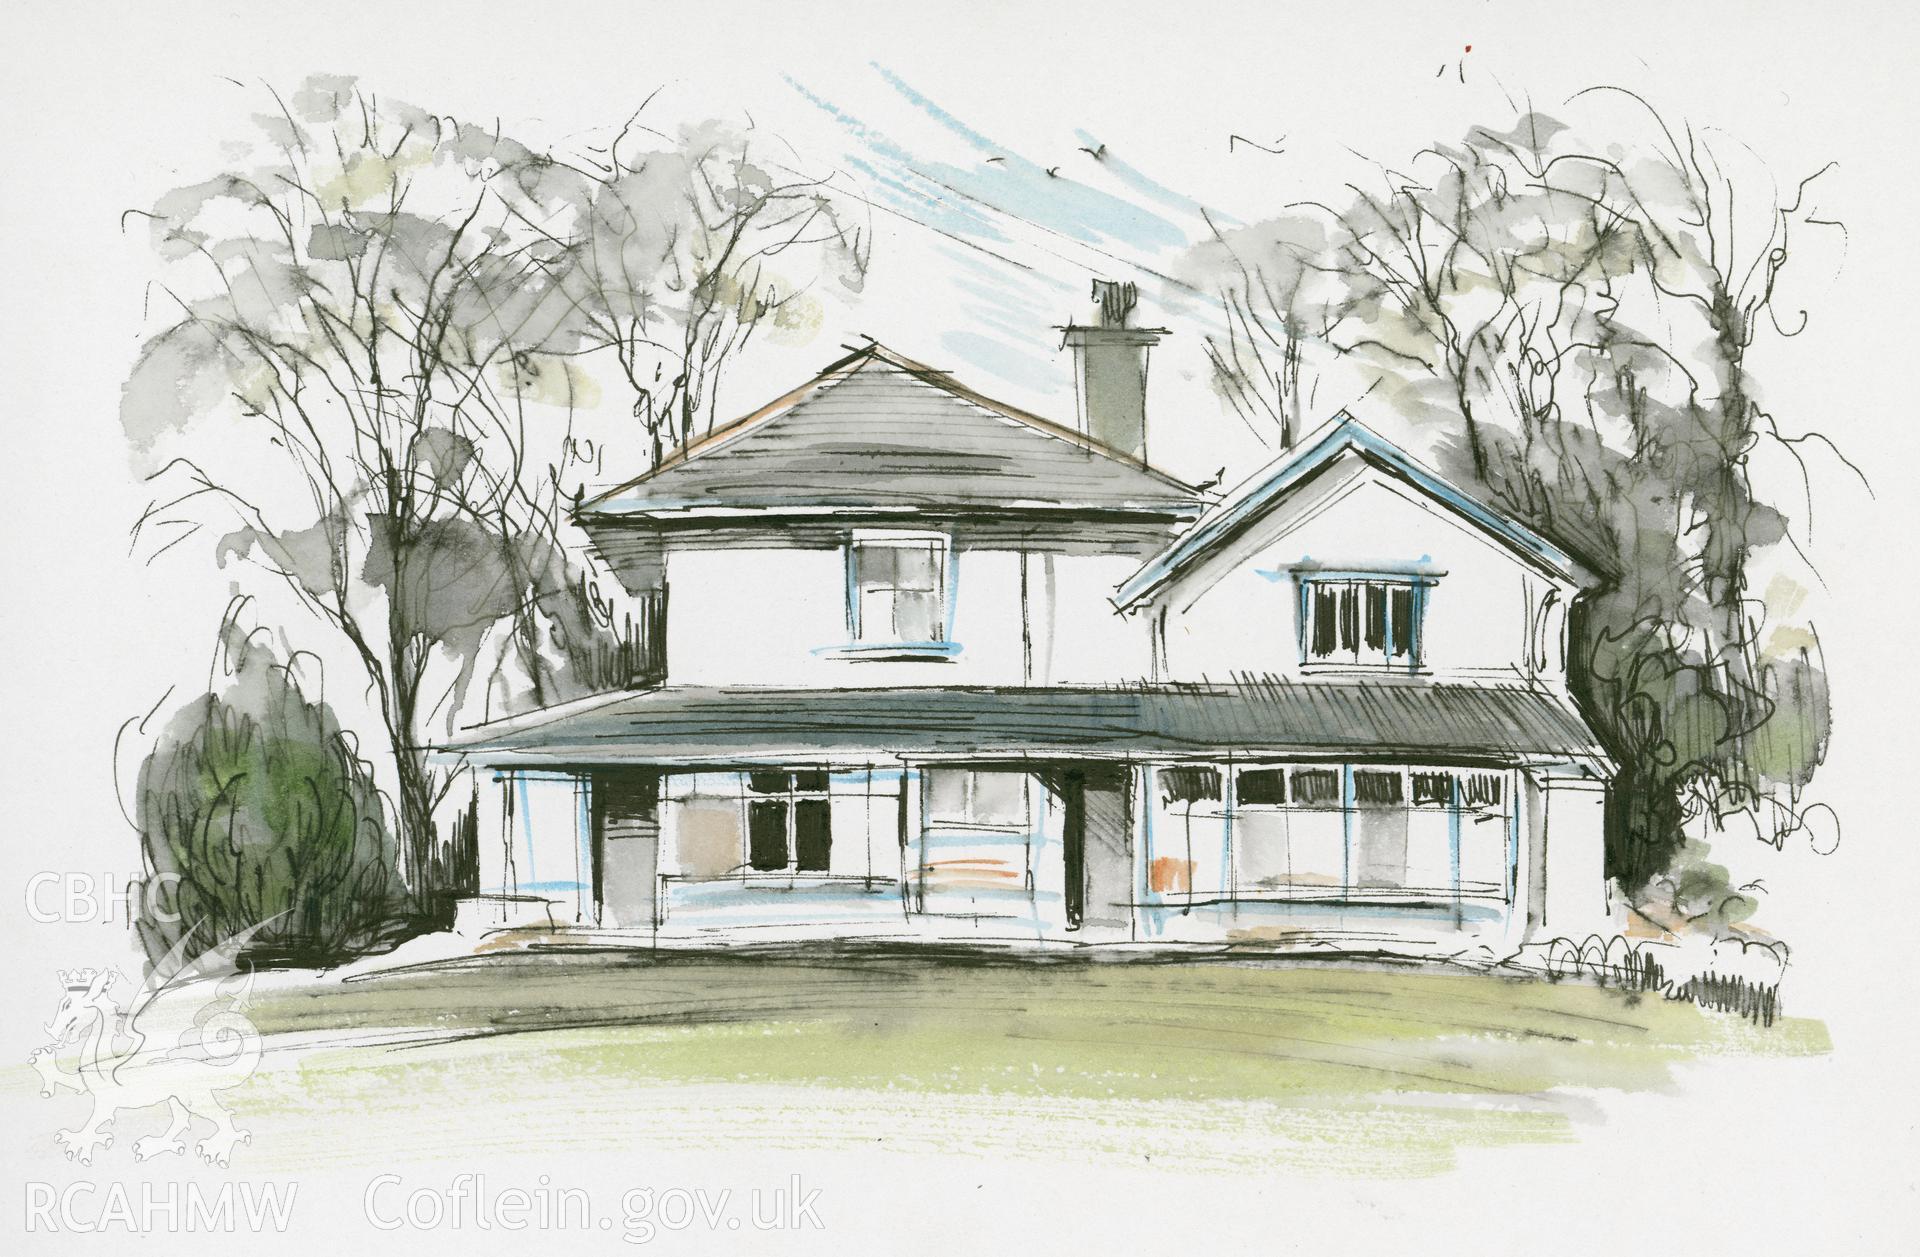 Steiner School - Looking Towards Carole's Room: (pencil and watercolour) drawing.